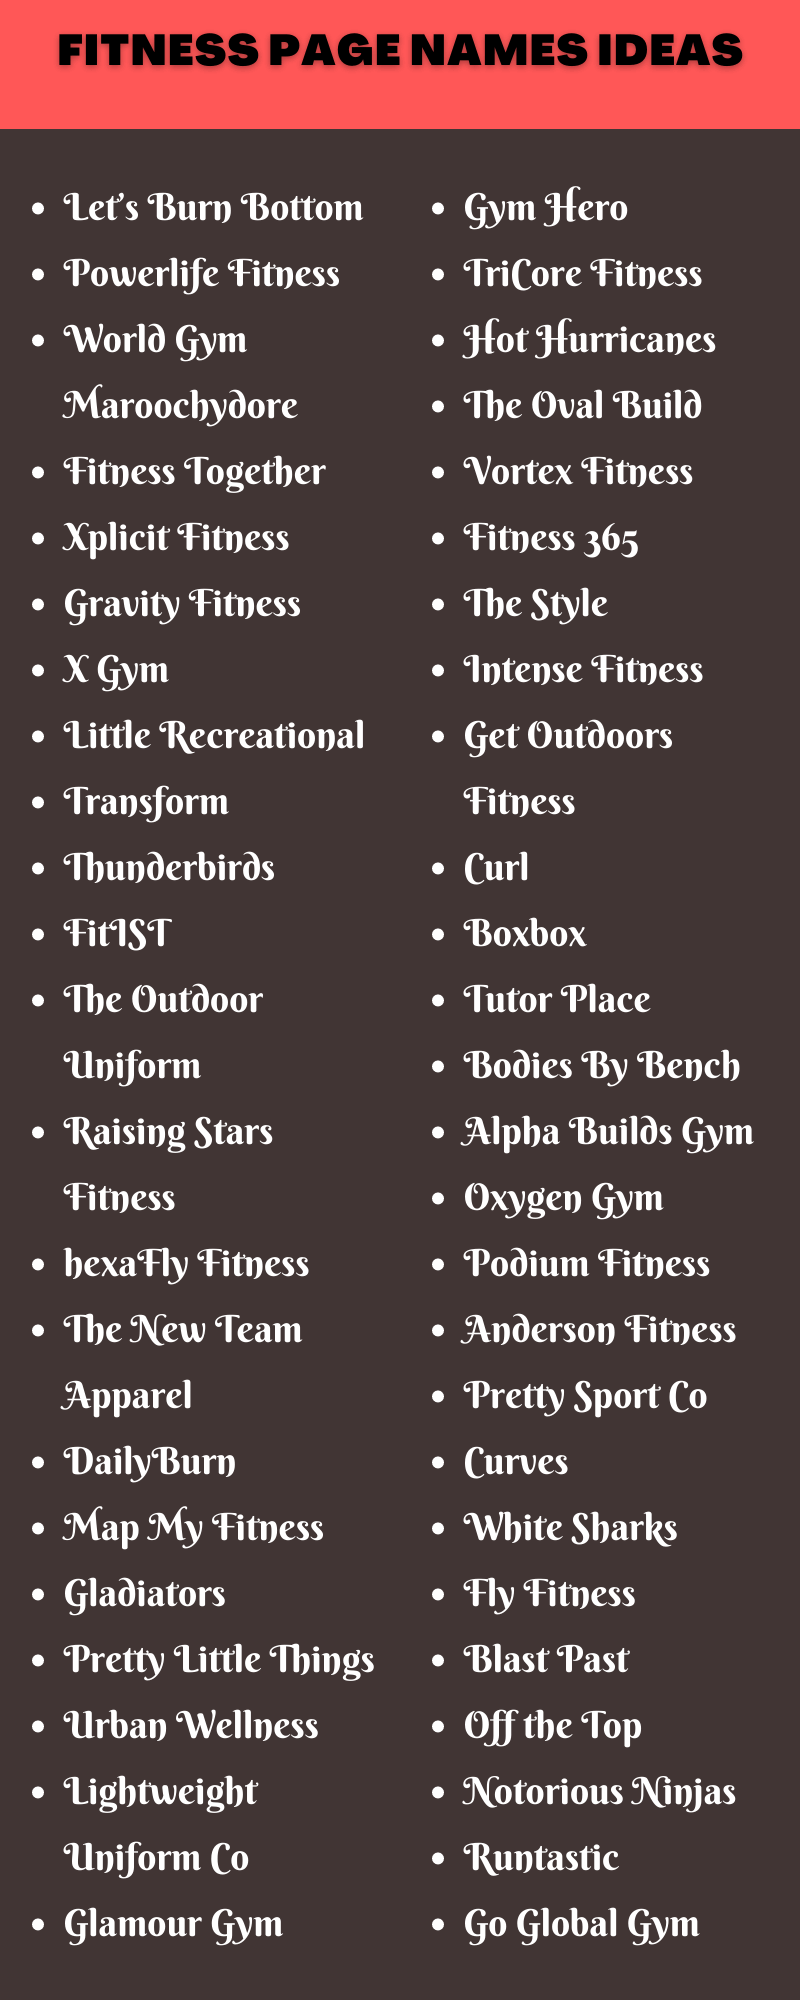 Fitness Page Names